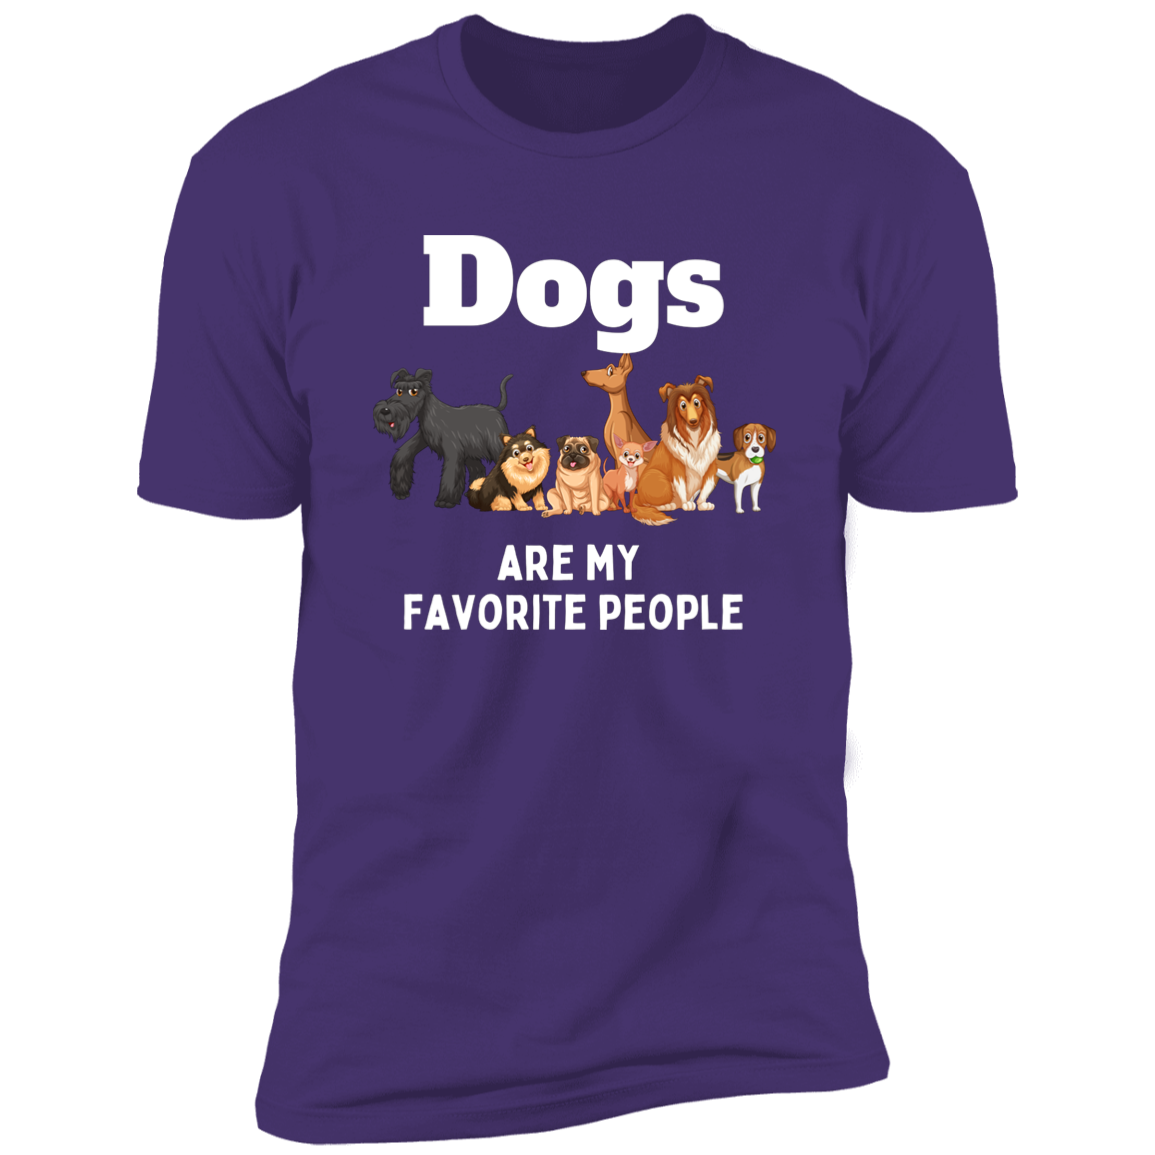 Dogs Are My Favorite People t-shirt, dog shirt for humans, in purple rush